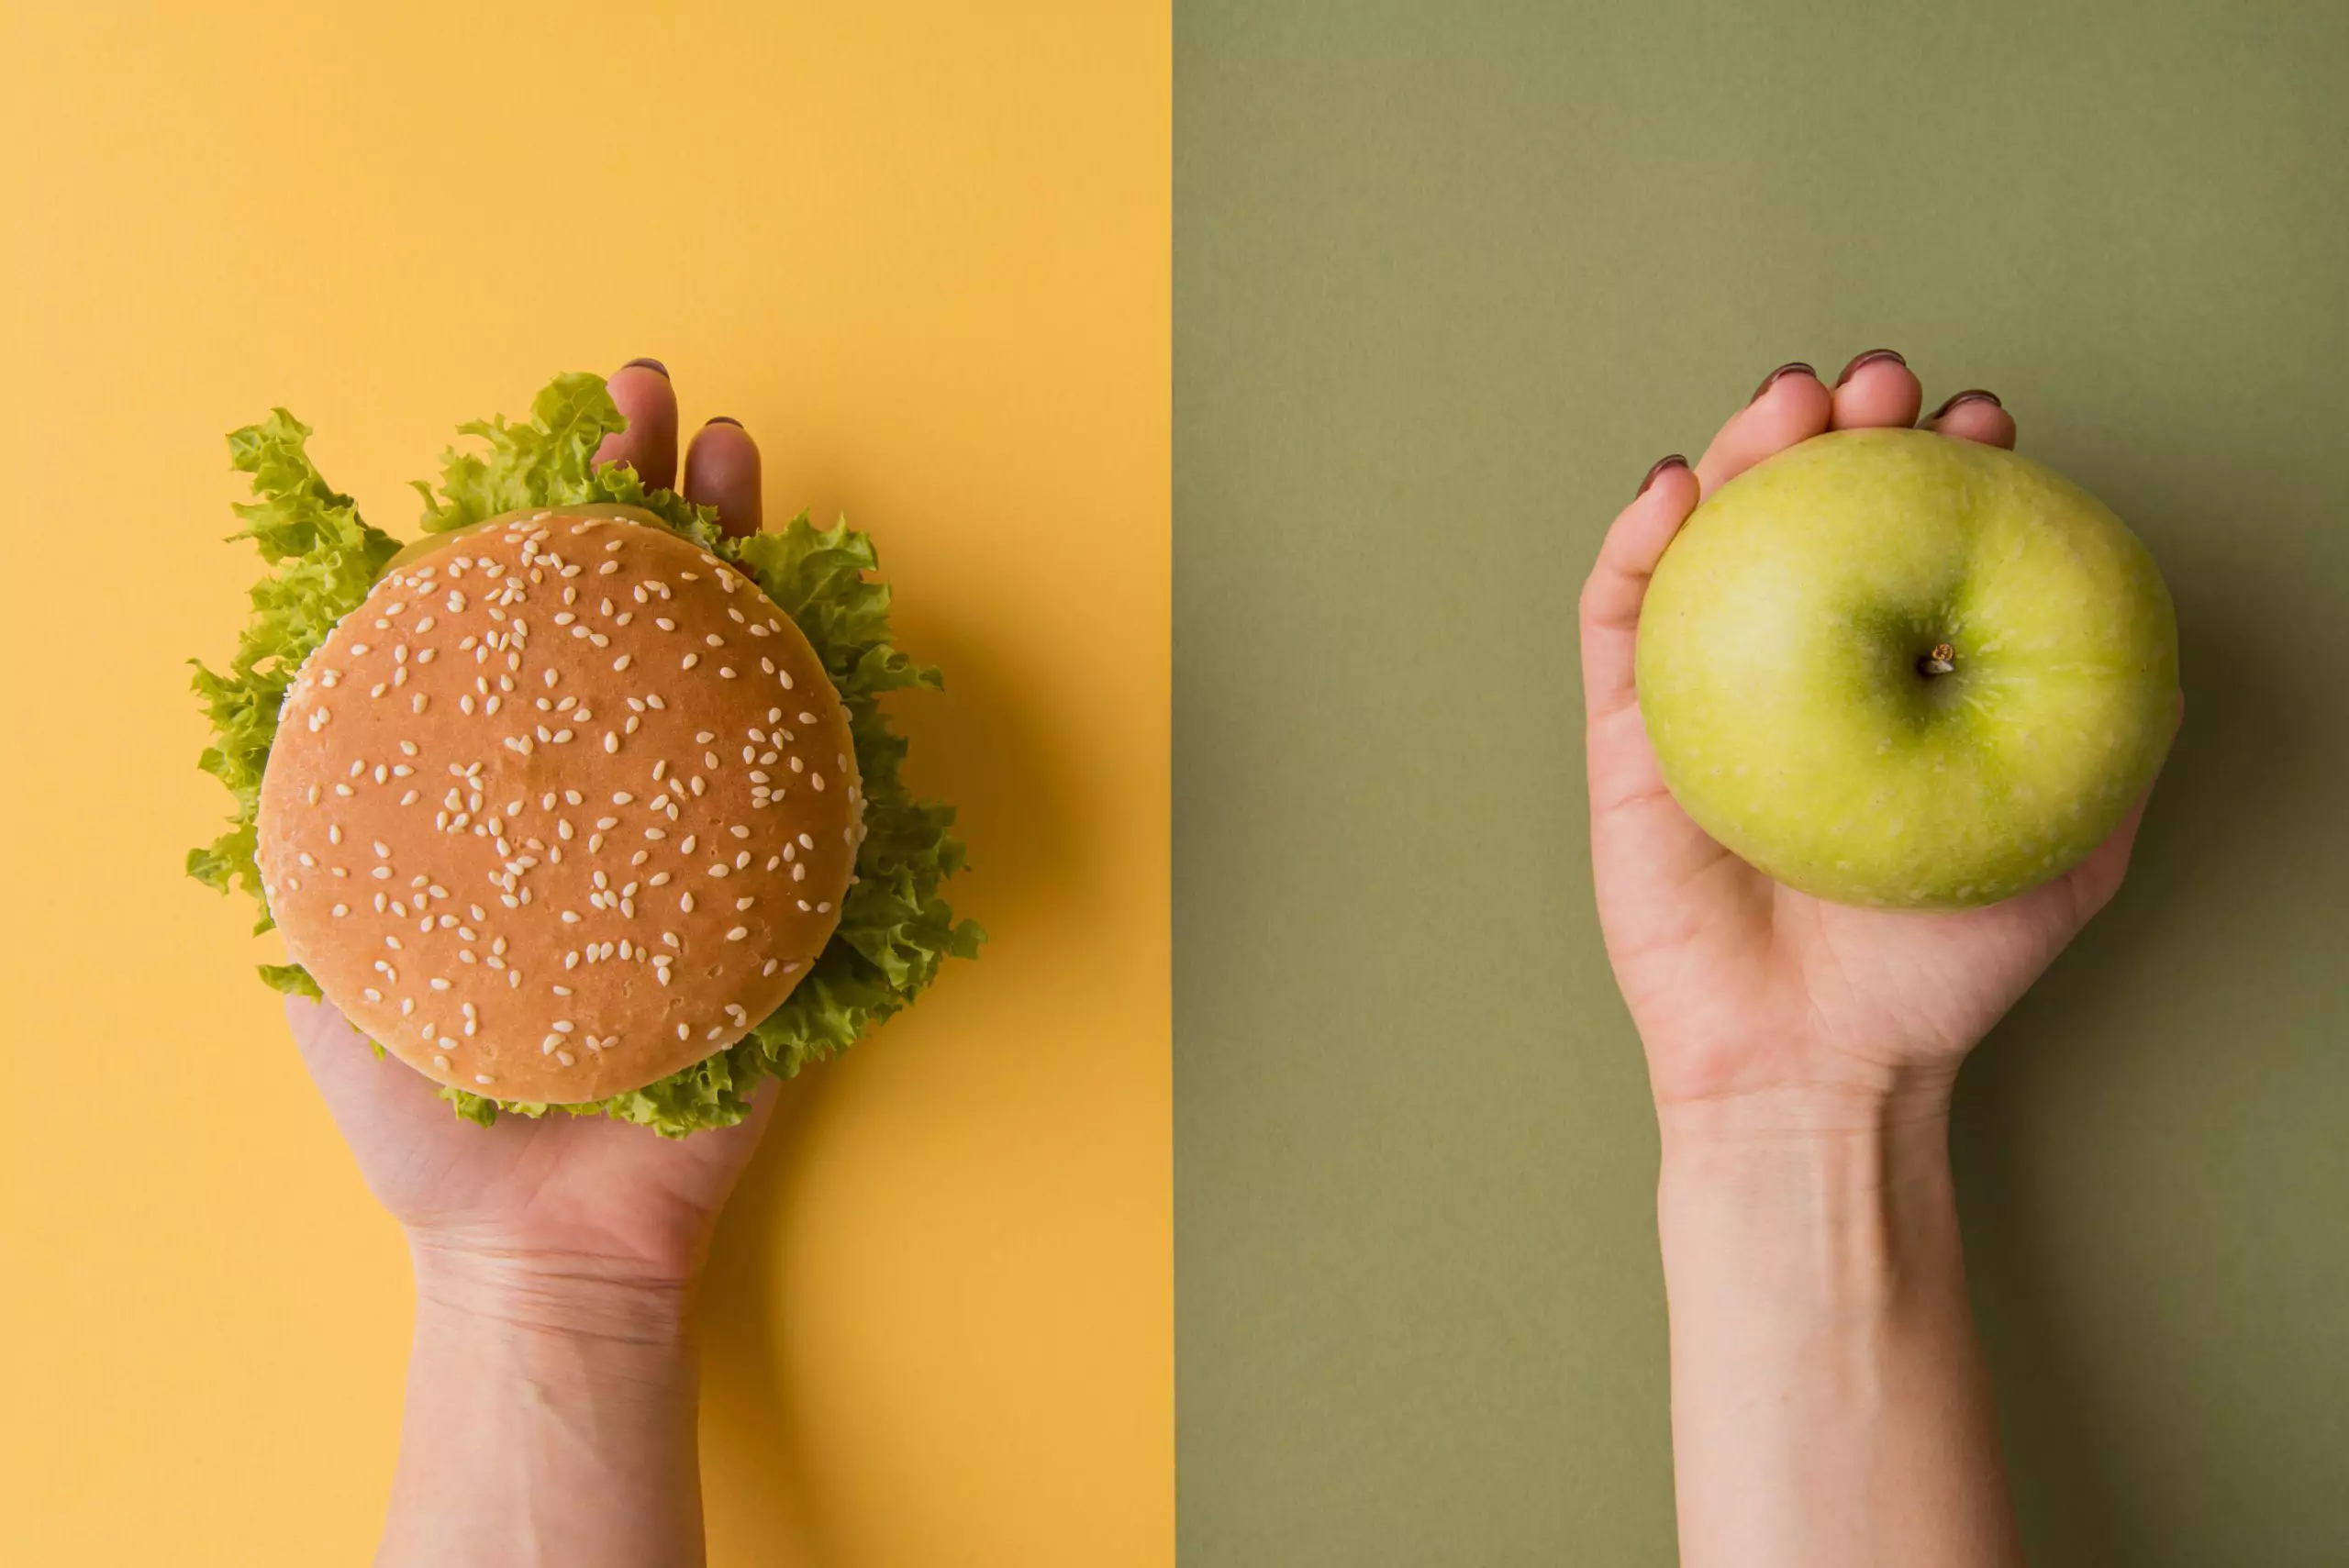 Hamburger and apple illustrate bad and good diet for kidneys